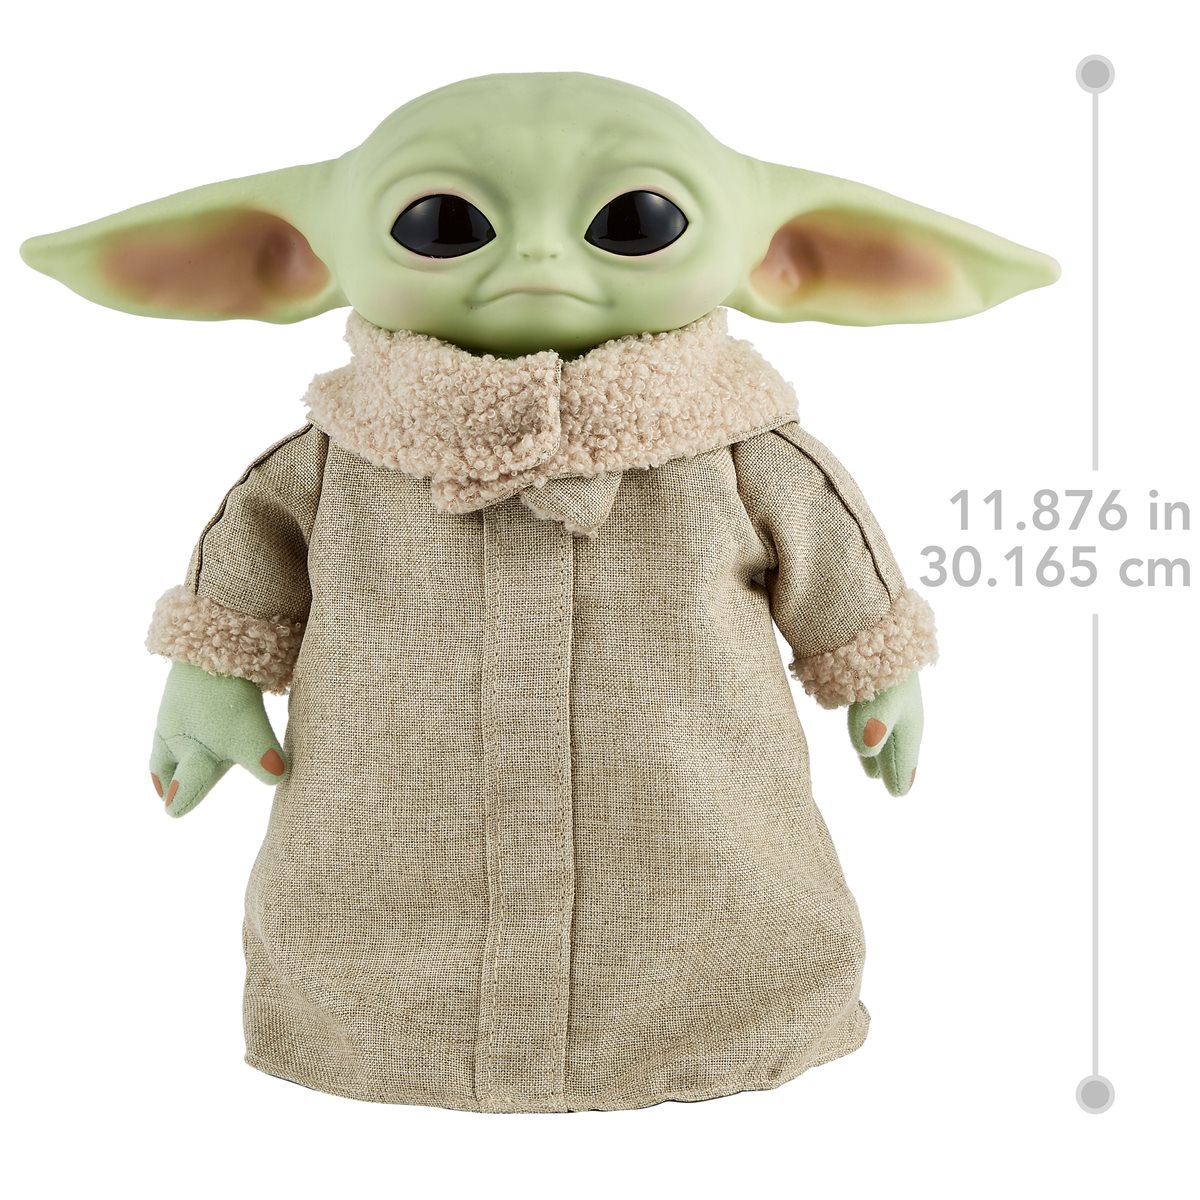 STAR WARS THE MANDALORIAN BABY YODA THE CHILD 11 INCH LIFE SIZE AUTHENTIC DISNEY 